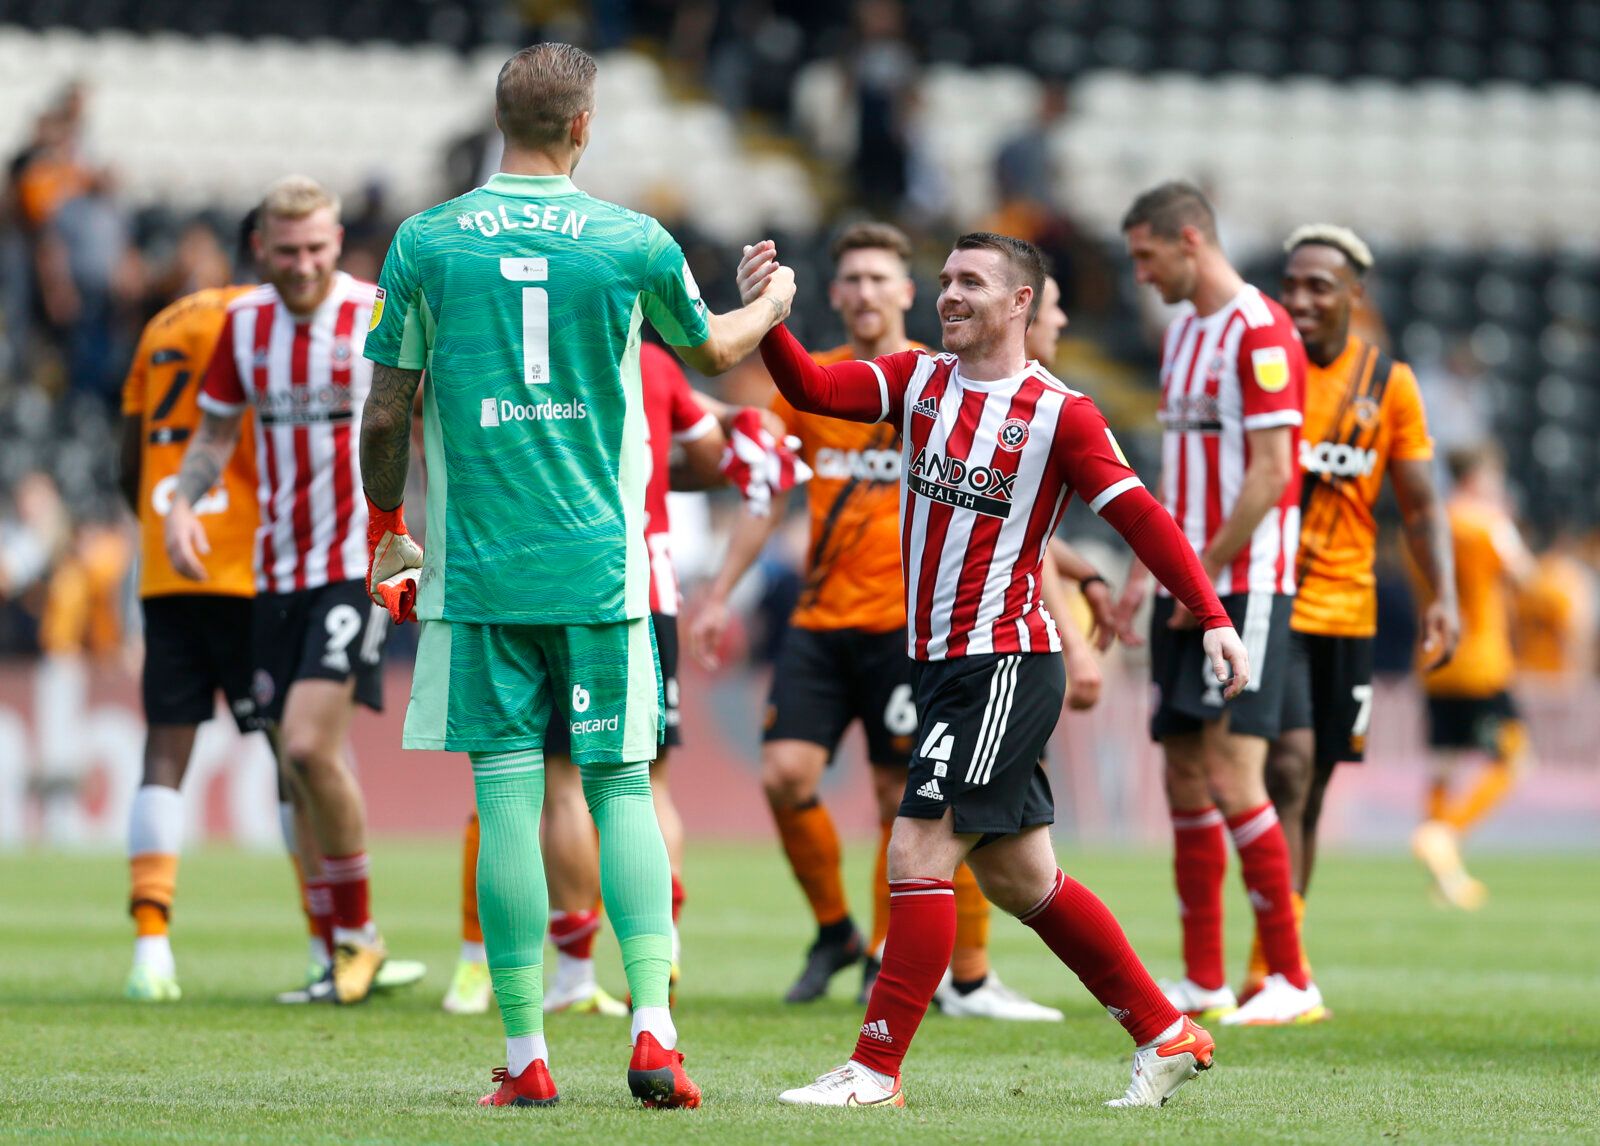 Soccer Football - Championship - Hull City v Sheffield United - KCOM Stadium, Hull, Britain - September 18, 2021 Sheffield United's John Fleck and Robin Olsen celebrate after the game Action Images/Ed Sykes EDITORIAL USE ONLY. No use with unauthorized audio, video, data, fixture lists, club/league logos or 'live' services. Online in-match use limited to 75 images, no video emulation. No use in betting, games or single club /league/player publications.  Please contact your account representative 